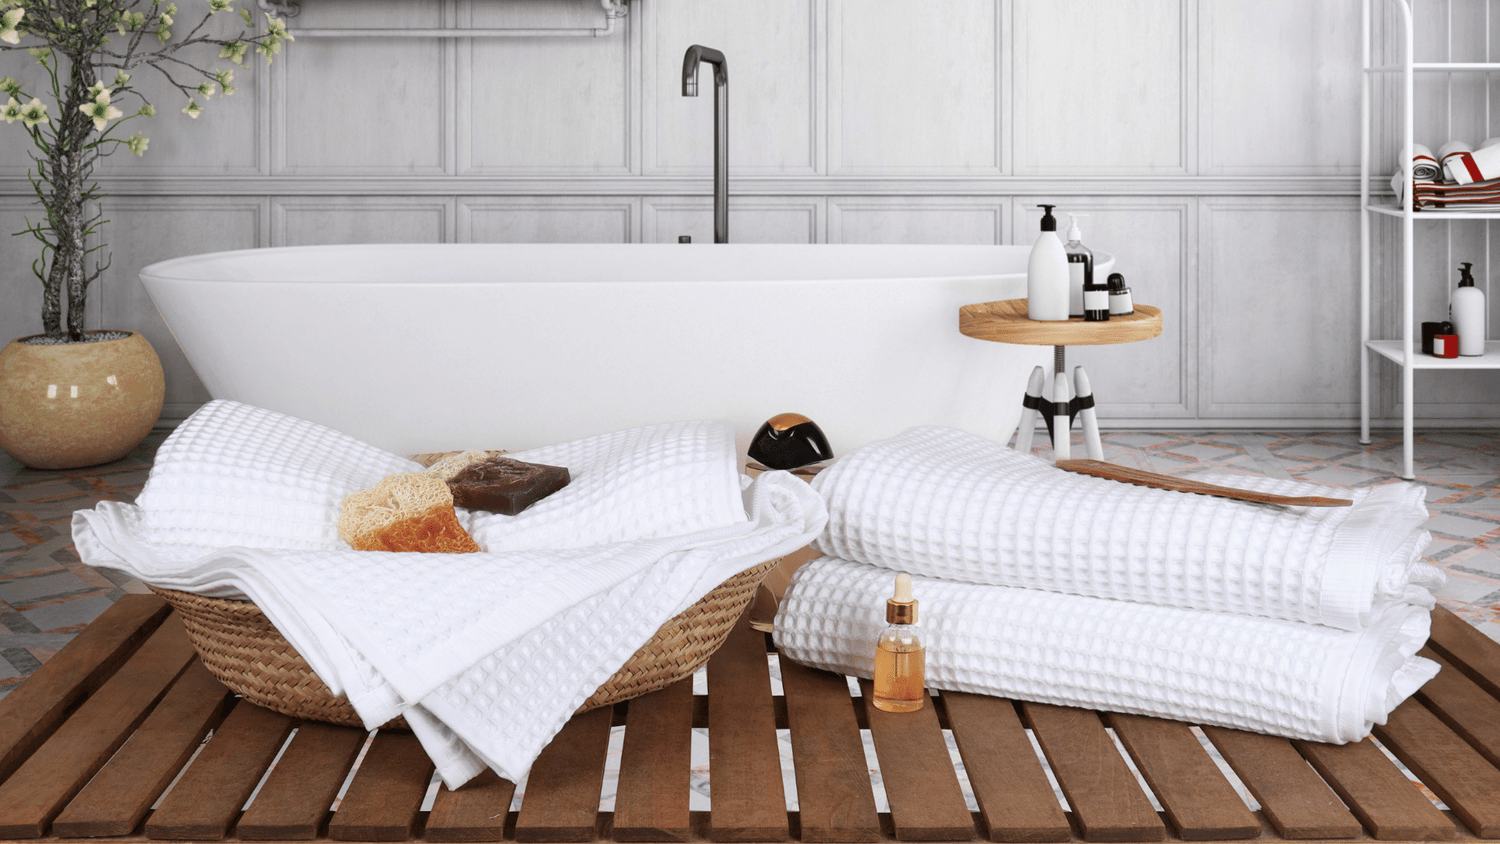 Turkish Cotton Waffle Weave Towels for Bath, Hand, Beach, Kitchen, Best White Honeycomb Towels